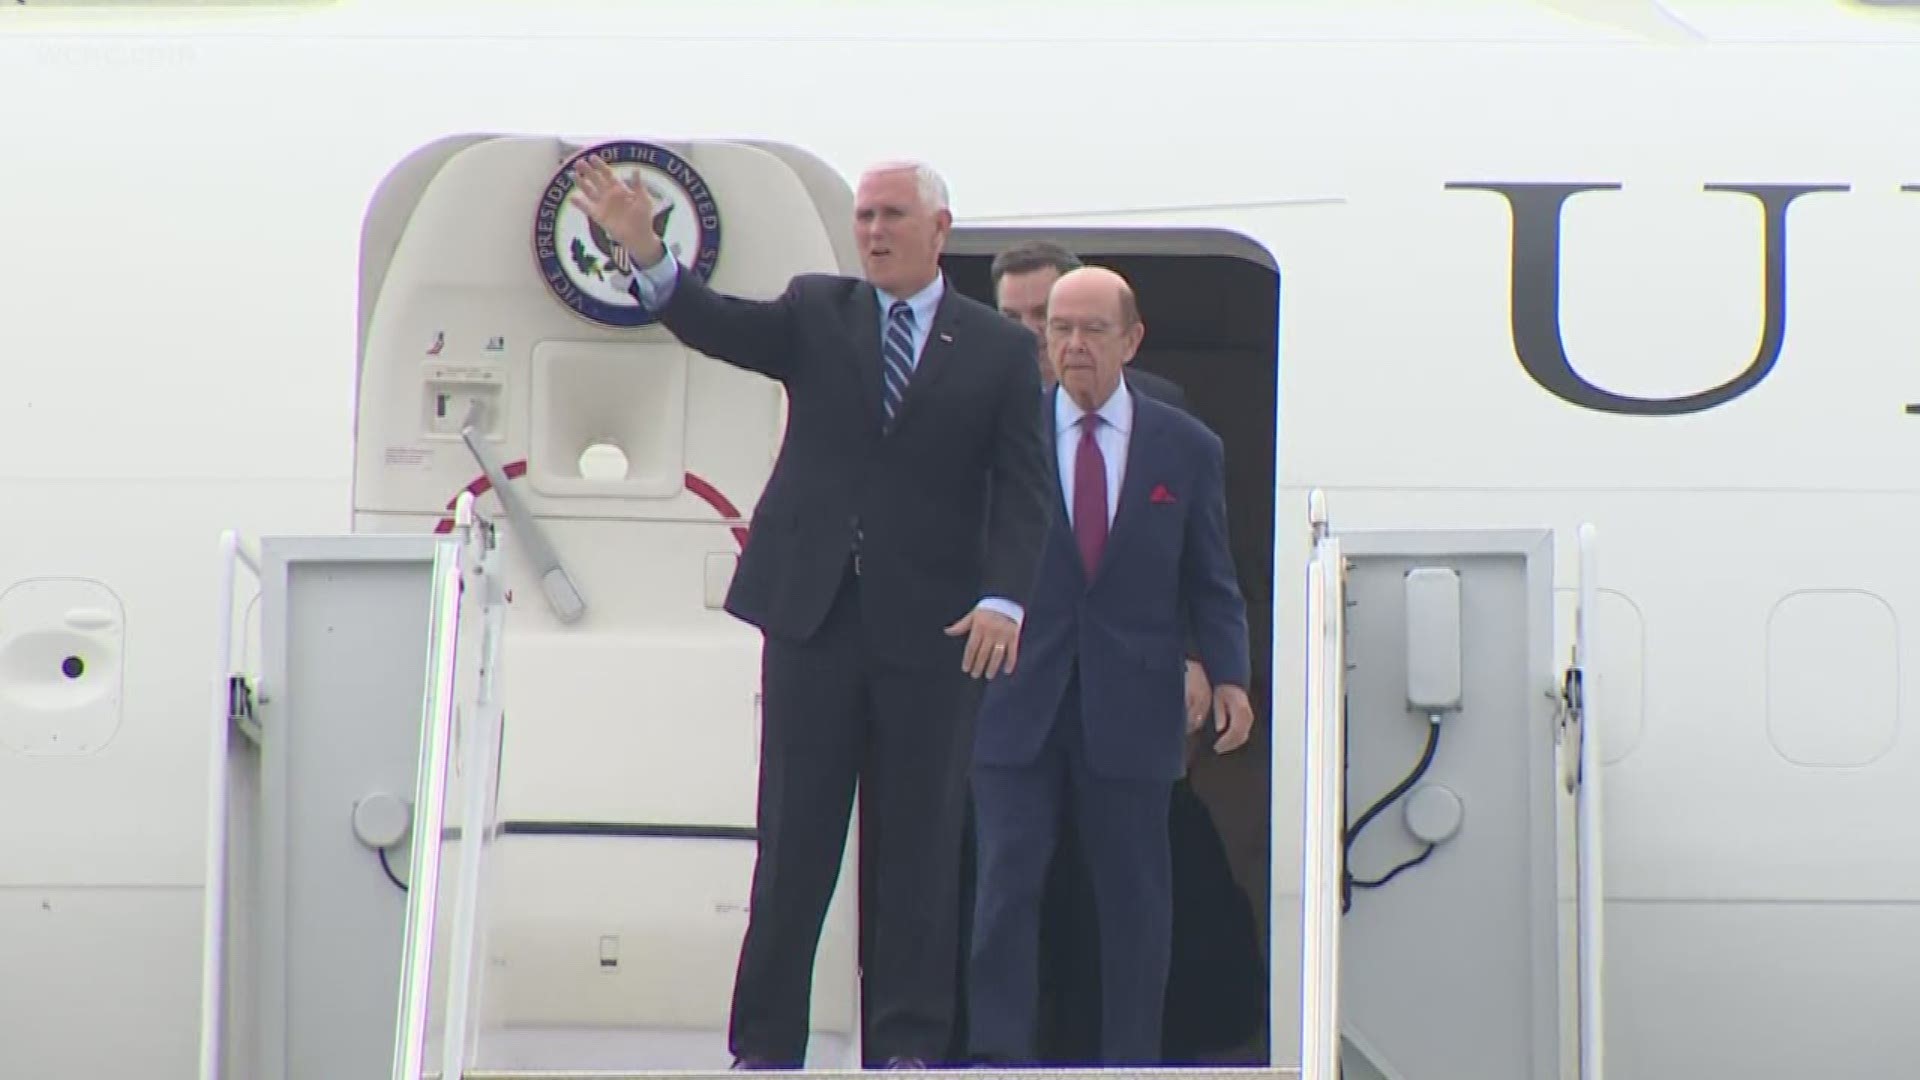 Vice President Mike Pence was greeted by a group of supporters after landing in Charlotte Wednesday. He is scheduled to speak at two events in the area before wrapping up his North Carolina visit in Greensboro.